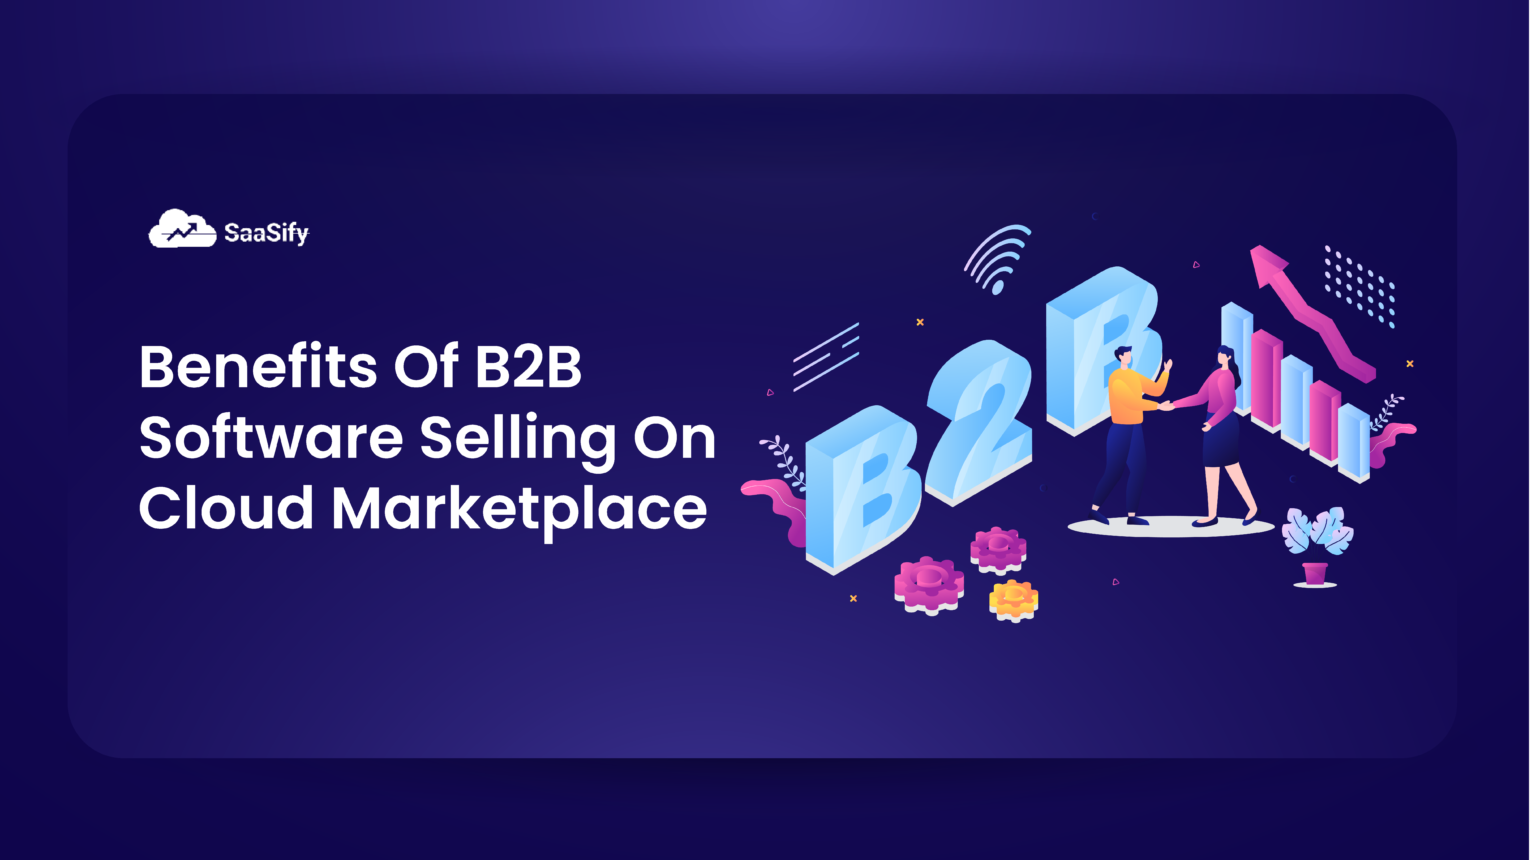 Benefits of B2B Software Selling on Cloud Marketplaces